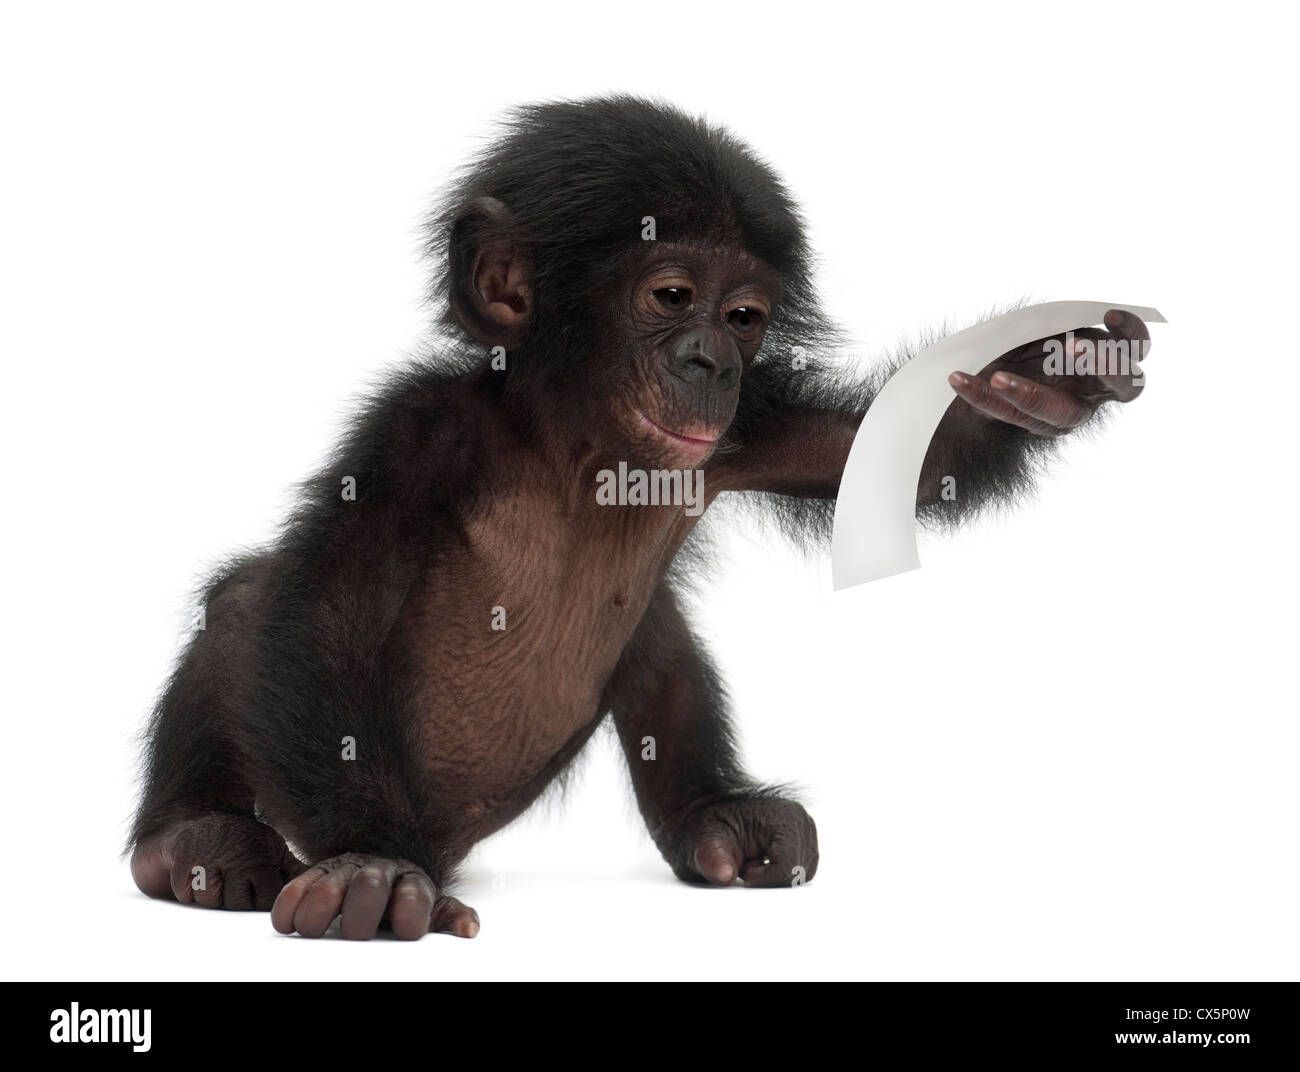 Baby bonobo, Pan paniscus, 4 months old, reading receipt against white background Stock Photo